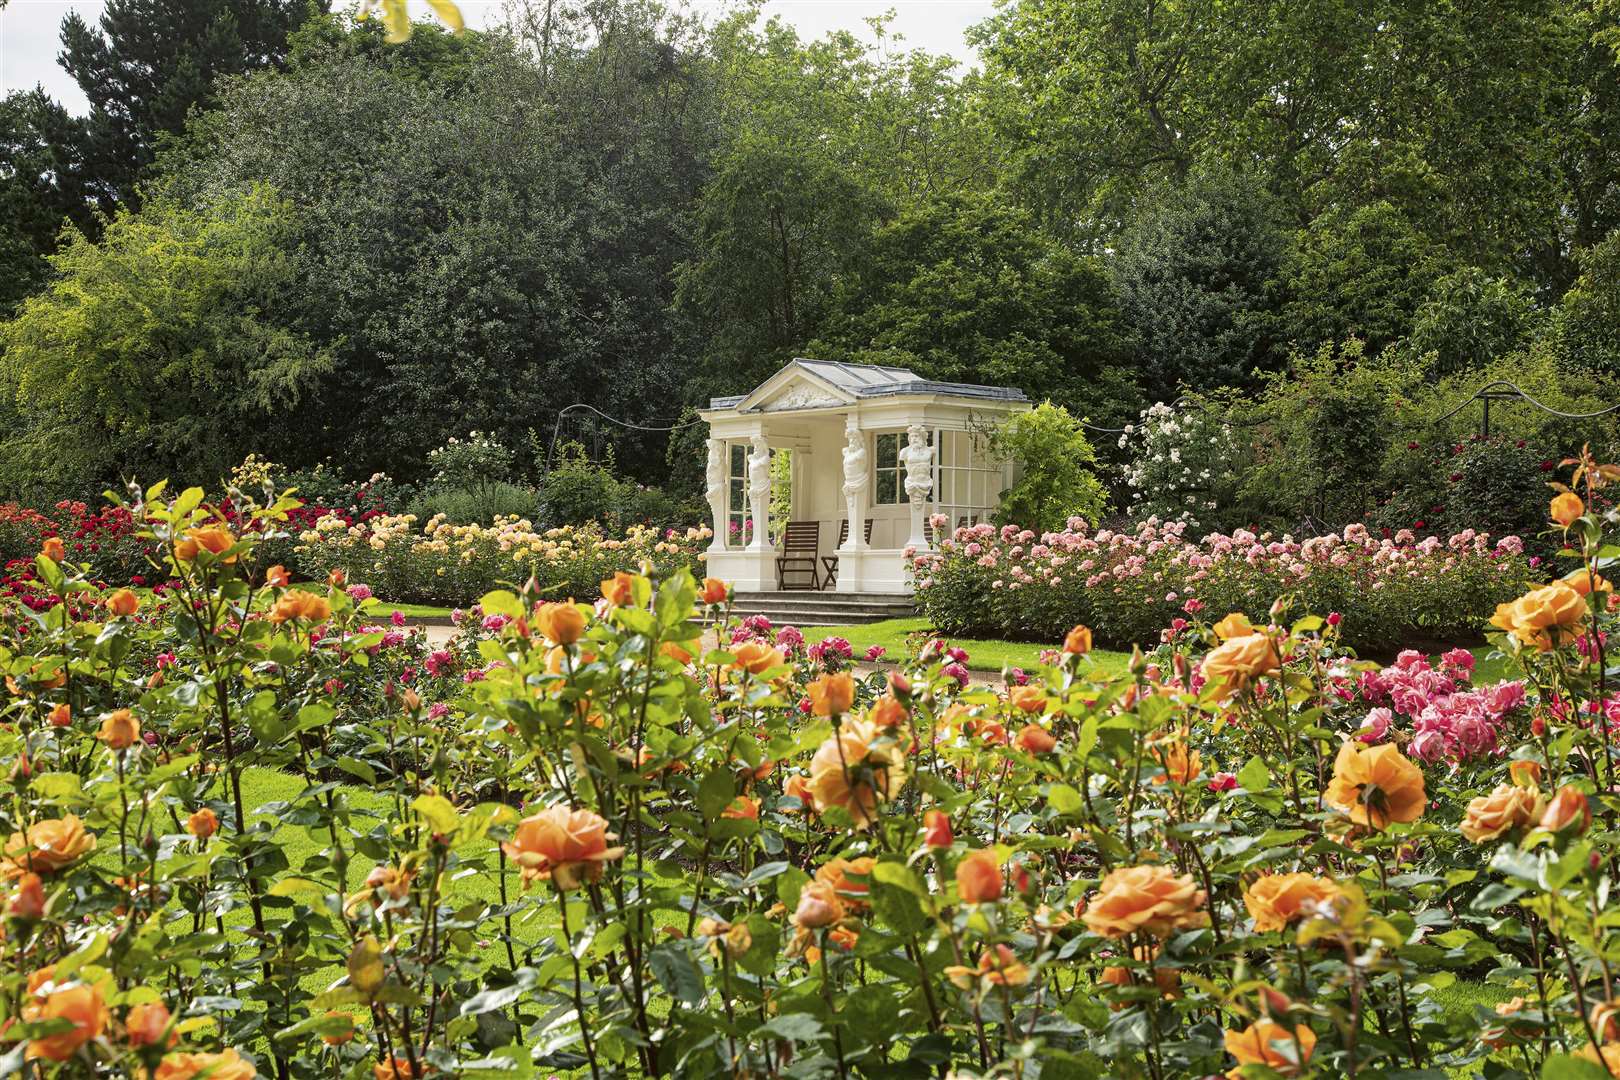 Special guided tours will also take visitors to see other parts of the gardens. Picture courtesy of Royal Collection Trust / © Her Majesty Queen Elizabeth II 2021 (46601602)